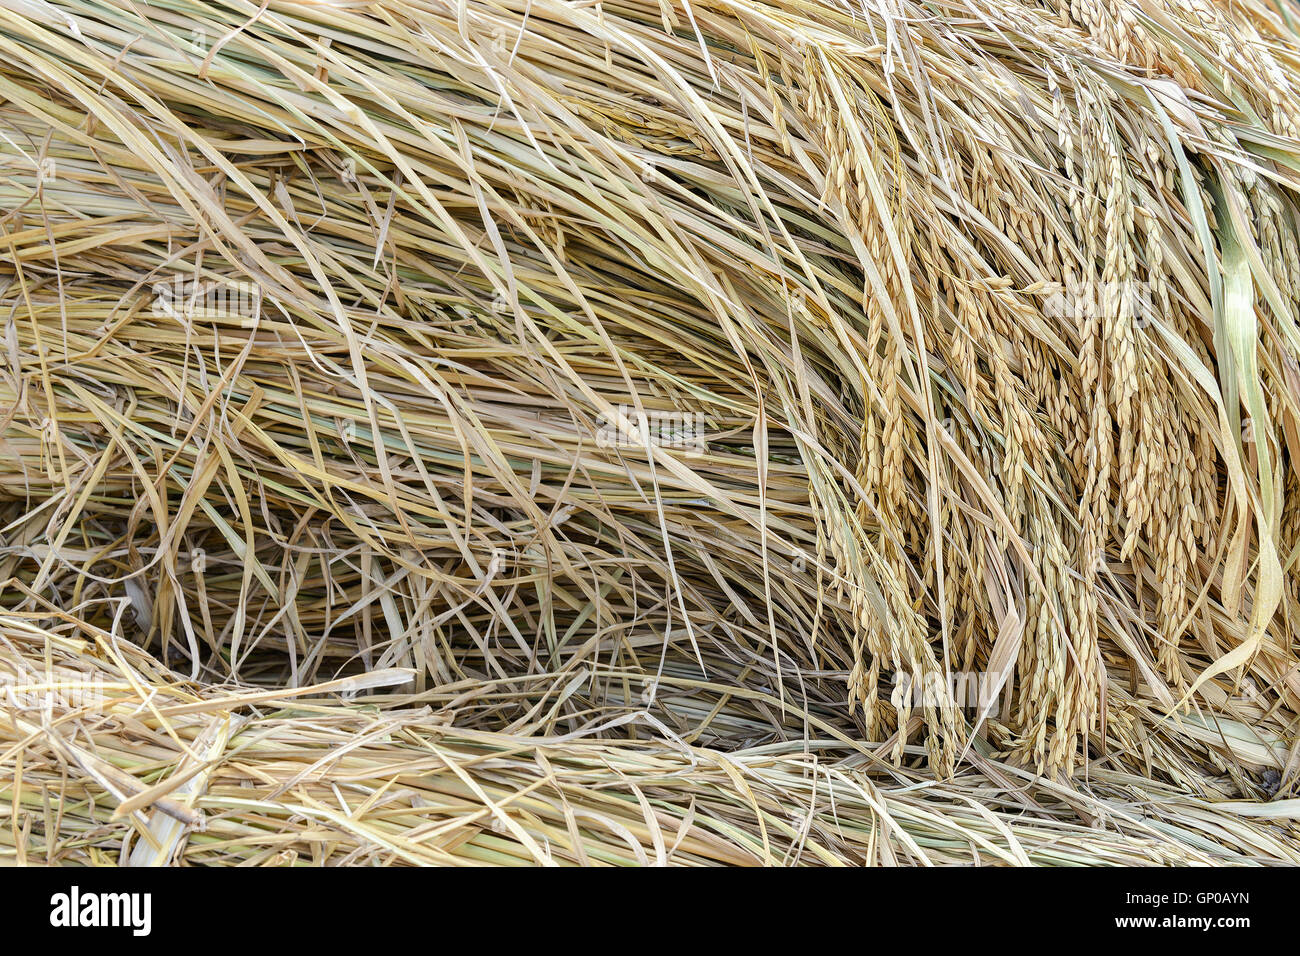 ear of paddy pile, harvested rice field. Stock Photo